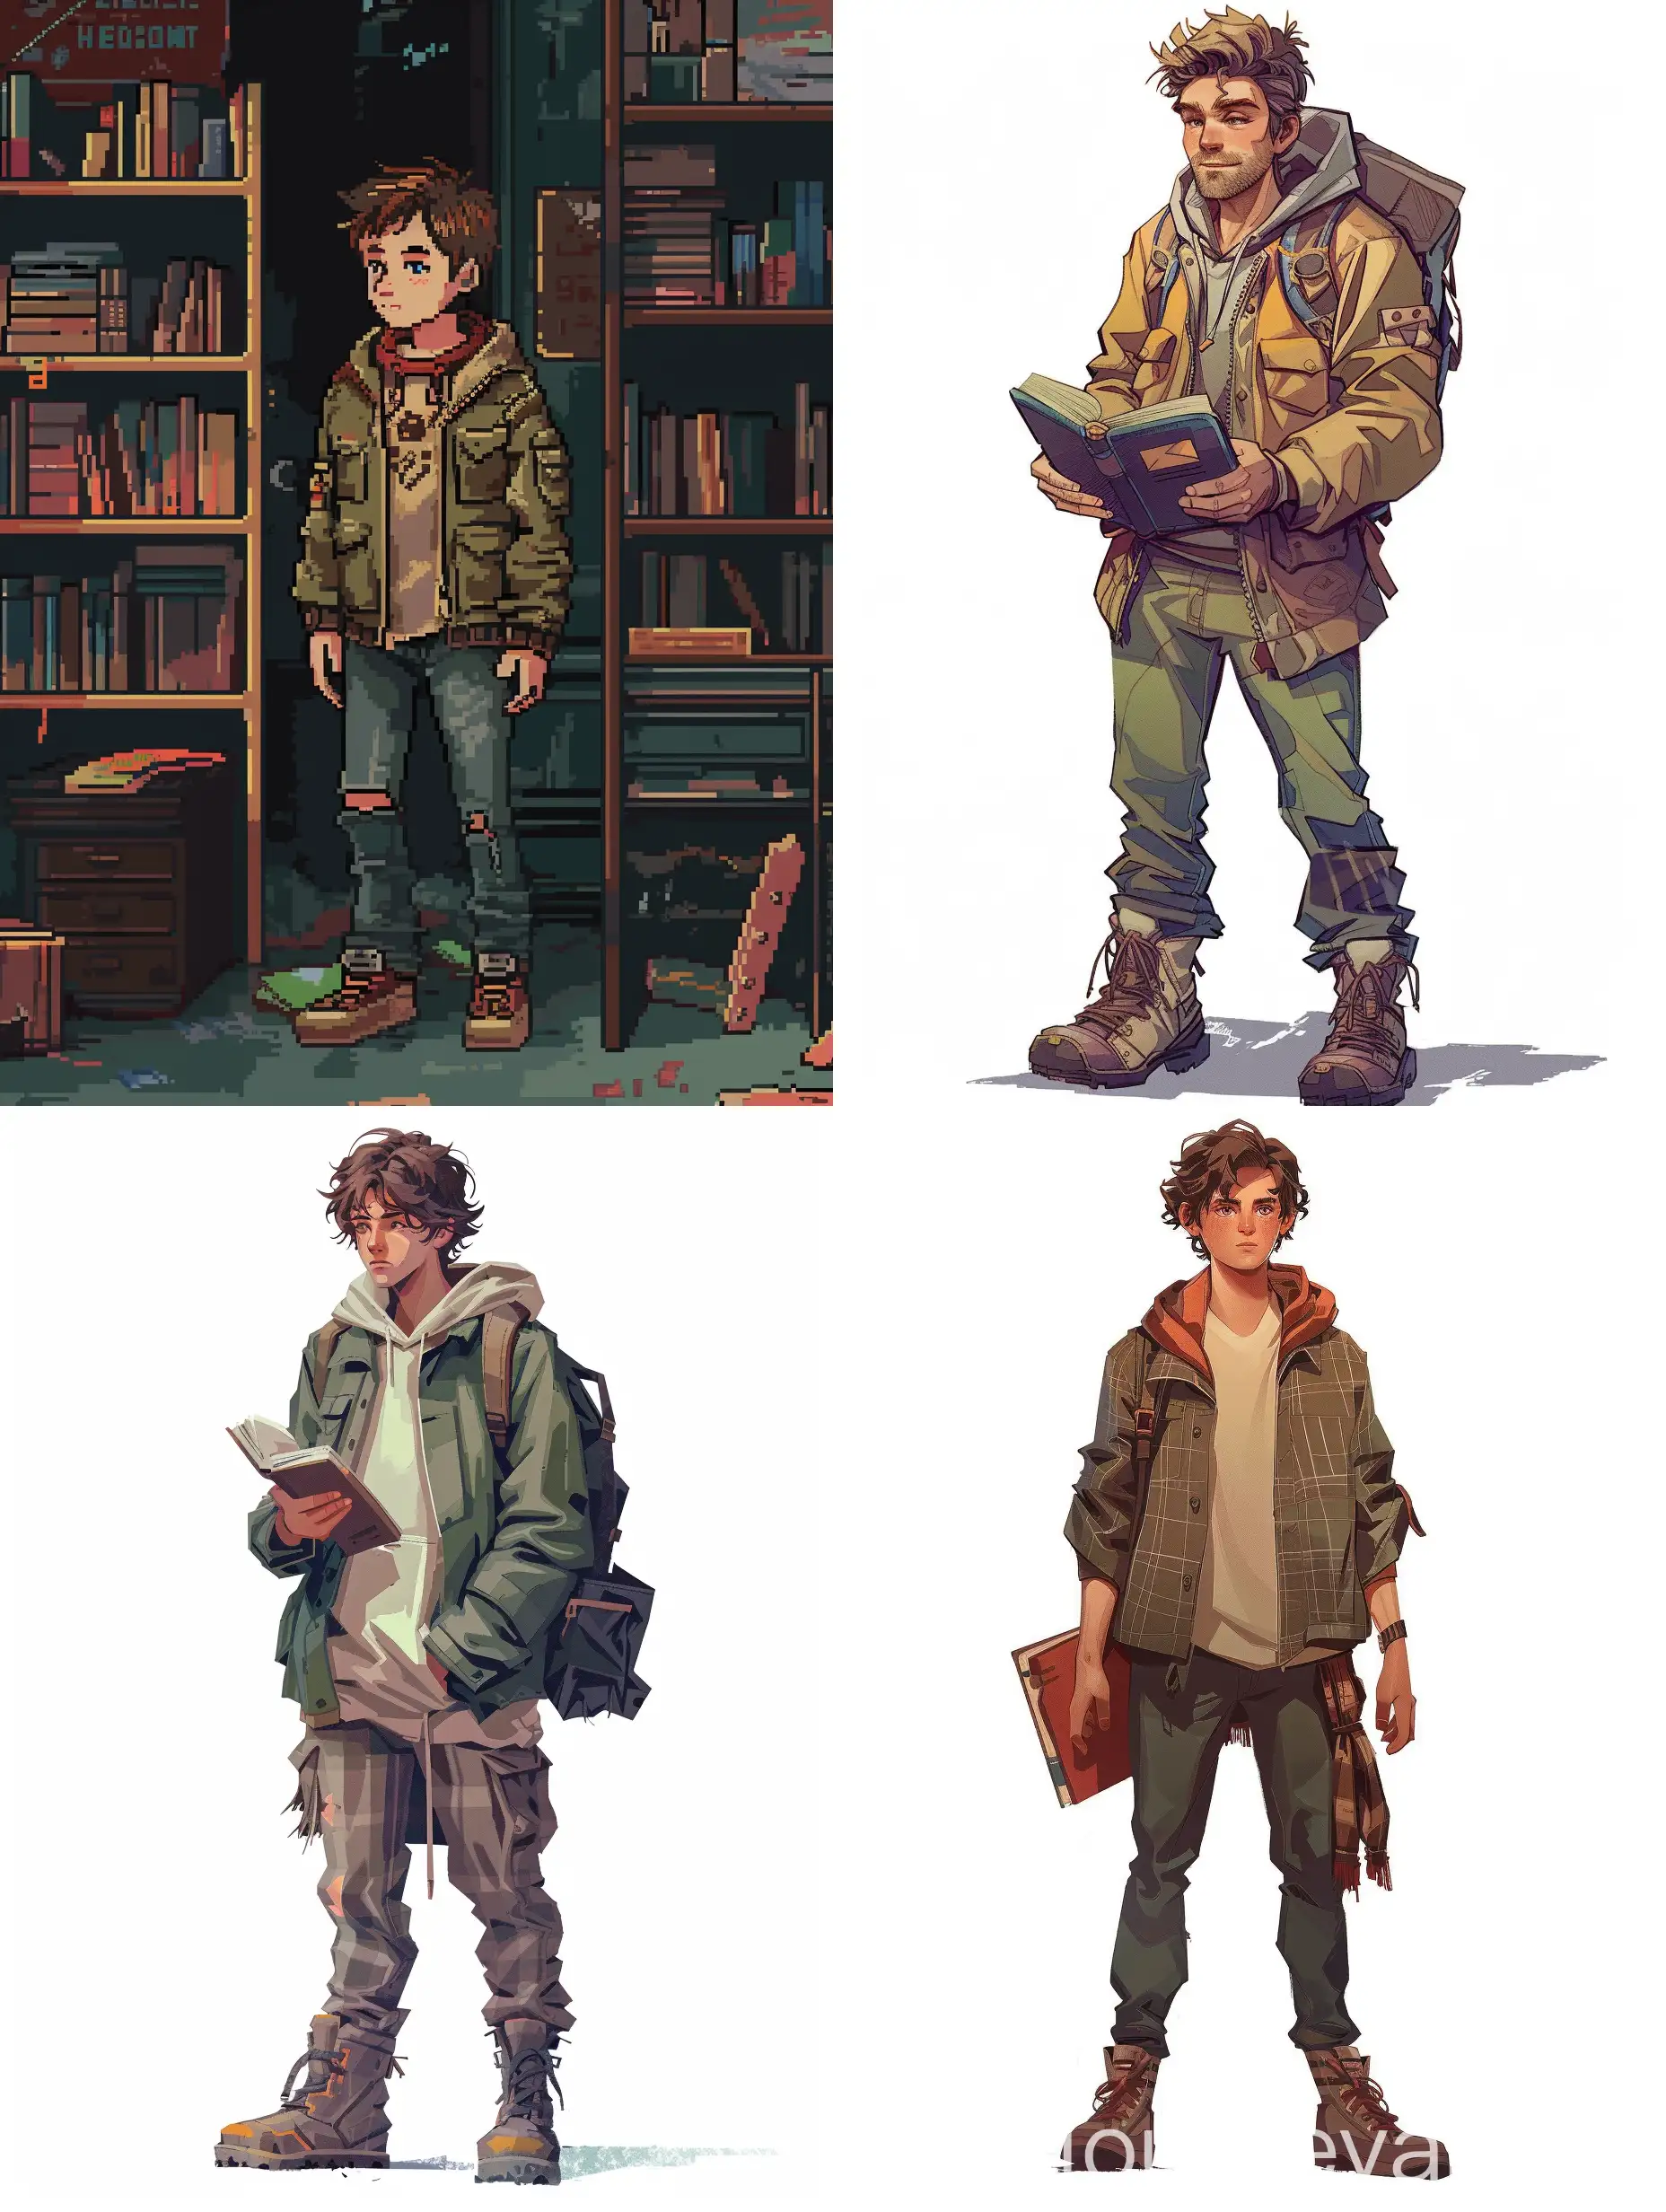 Eliot is a clever young man whose eyes reflect emotions, changing color depending on his experiences. He has short unruly hair and delicate and expressive facial features. He is wearing a light patterned jacket and comfortable trousers, complemented by sturdy boots and an old adventure book. Eliot embodies the spirit of exploration and the emotional depth of the game. Standing “pixel art", “clean pixel art", “simple pixel art” "2D game" "2D art"